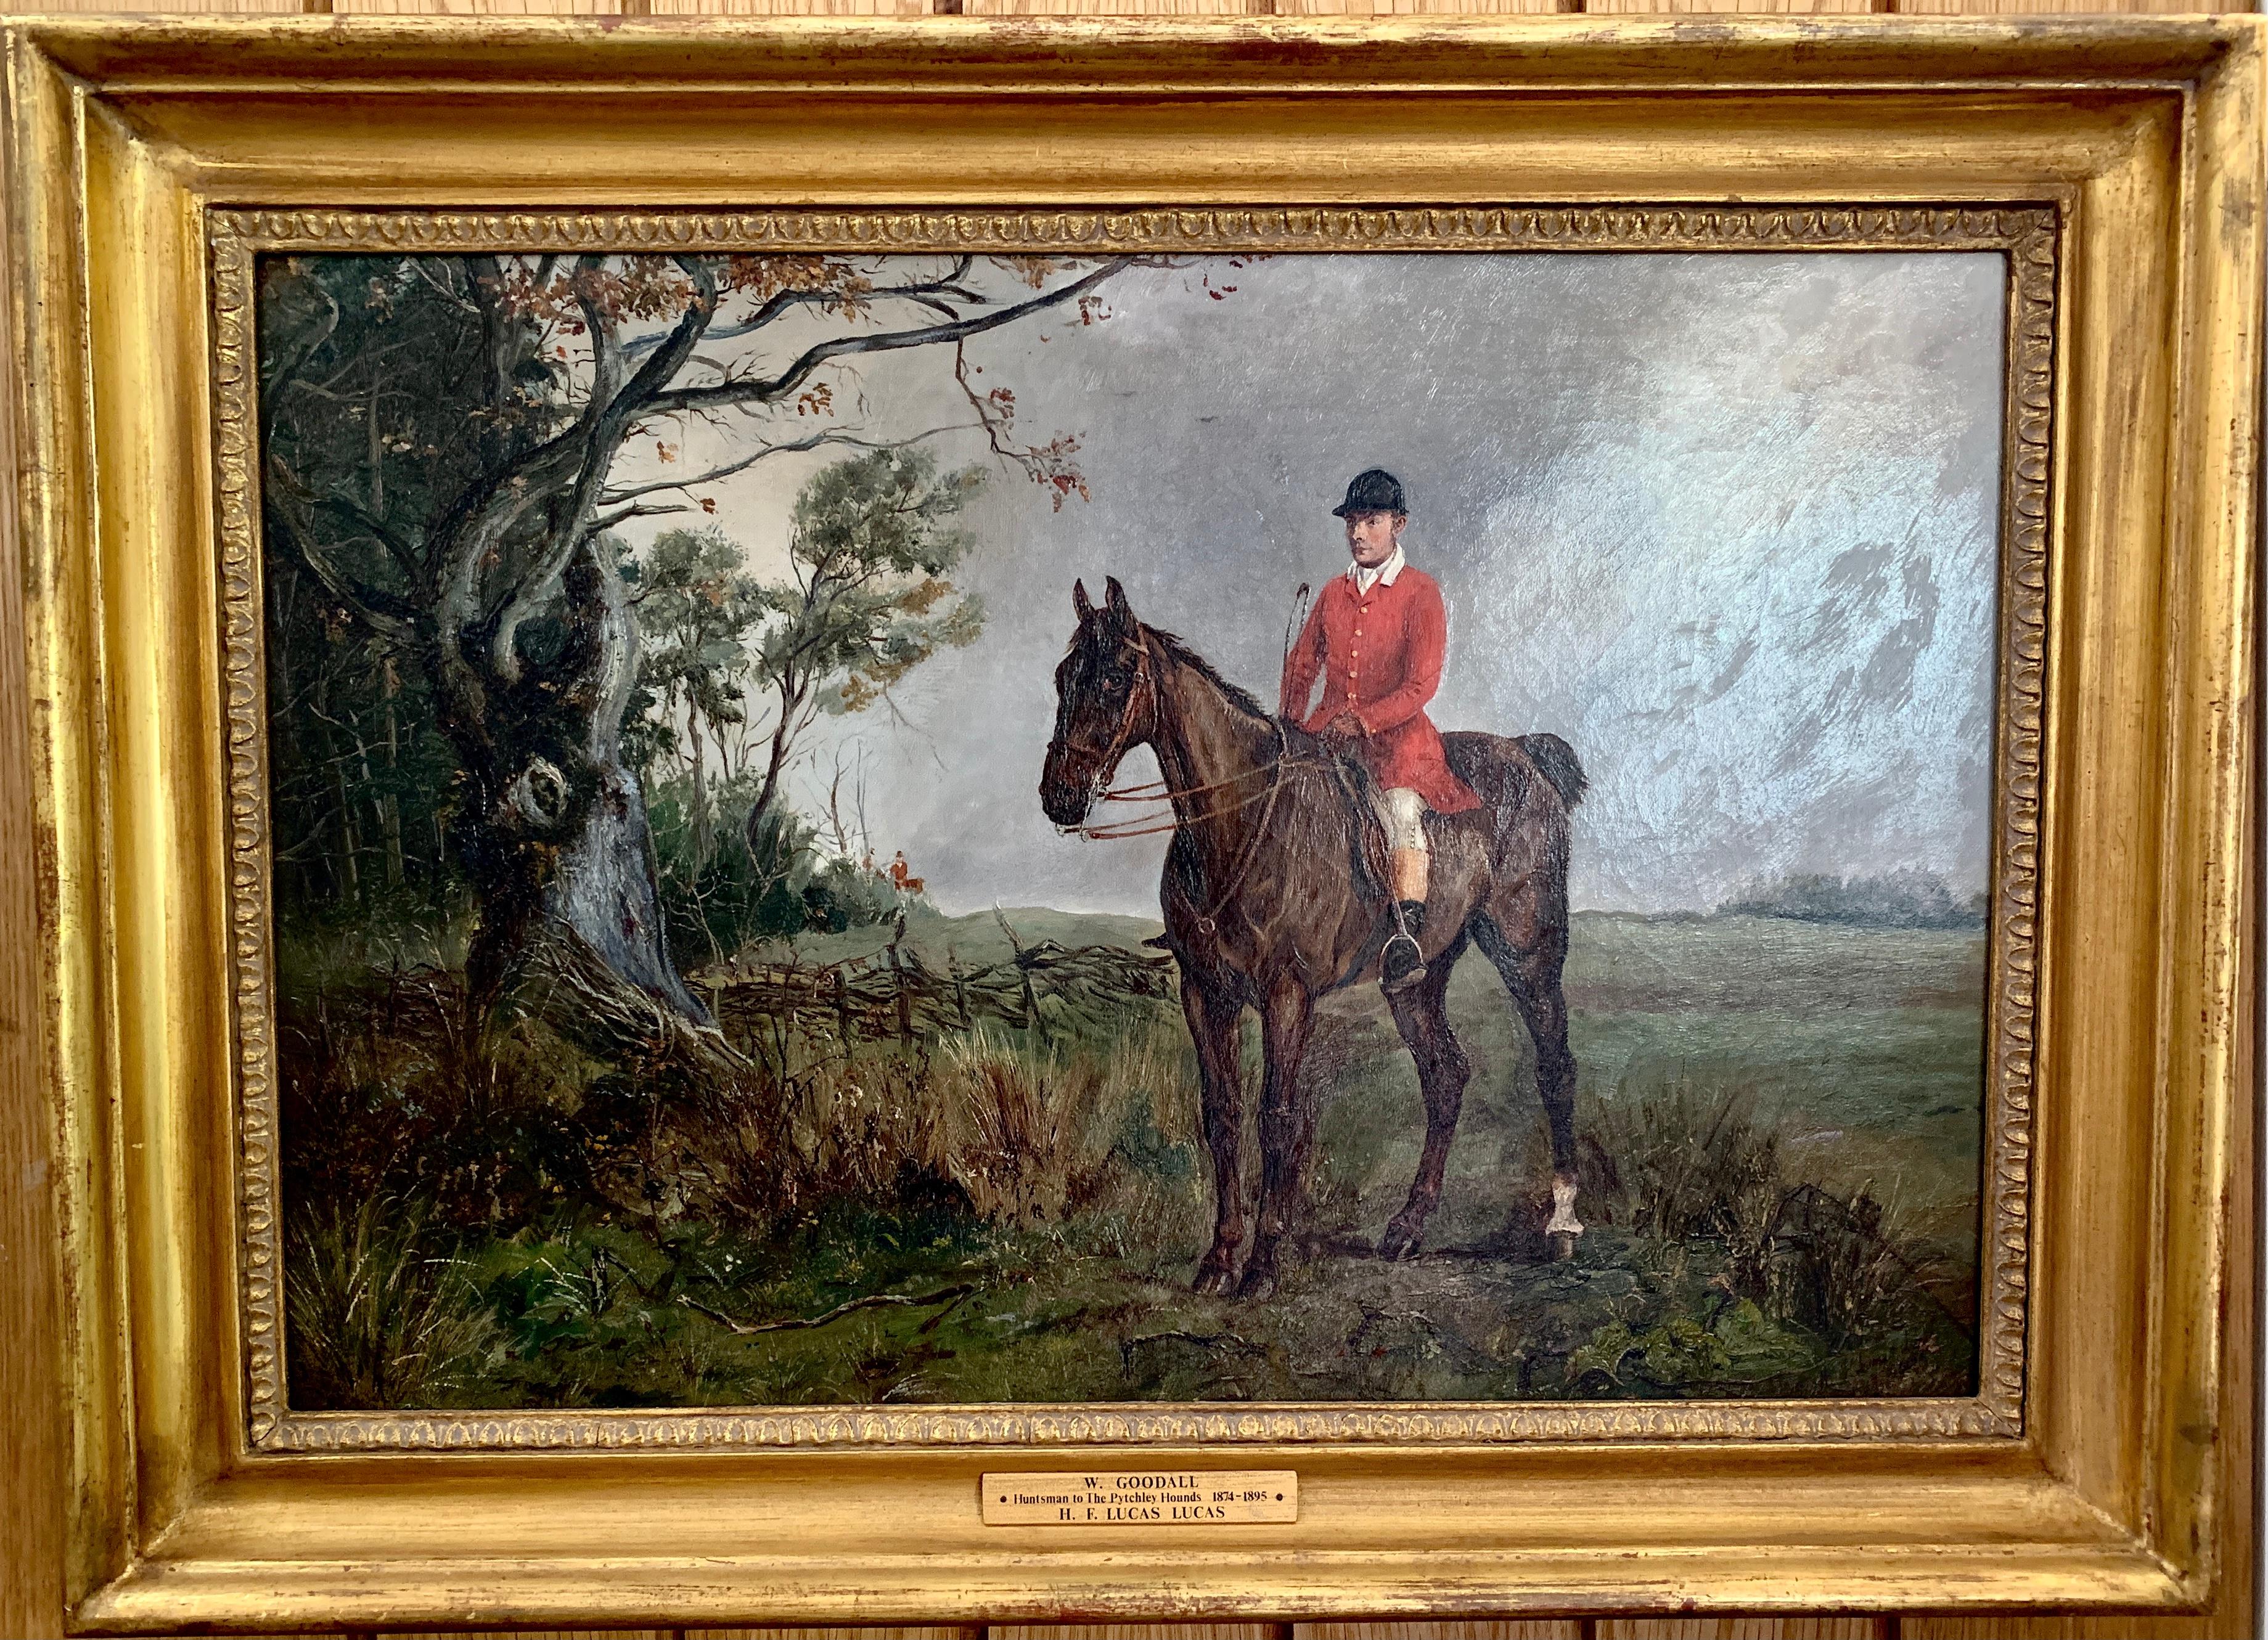 Henry Frederick Lucas Lucas  Animal Painting - Horse and Huntsman in a landscape, English late 19th century oil on canvas